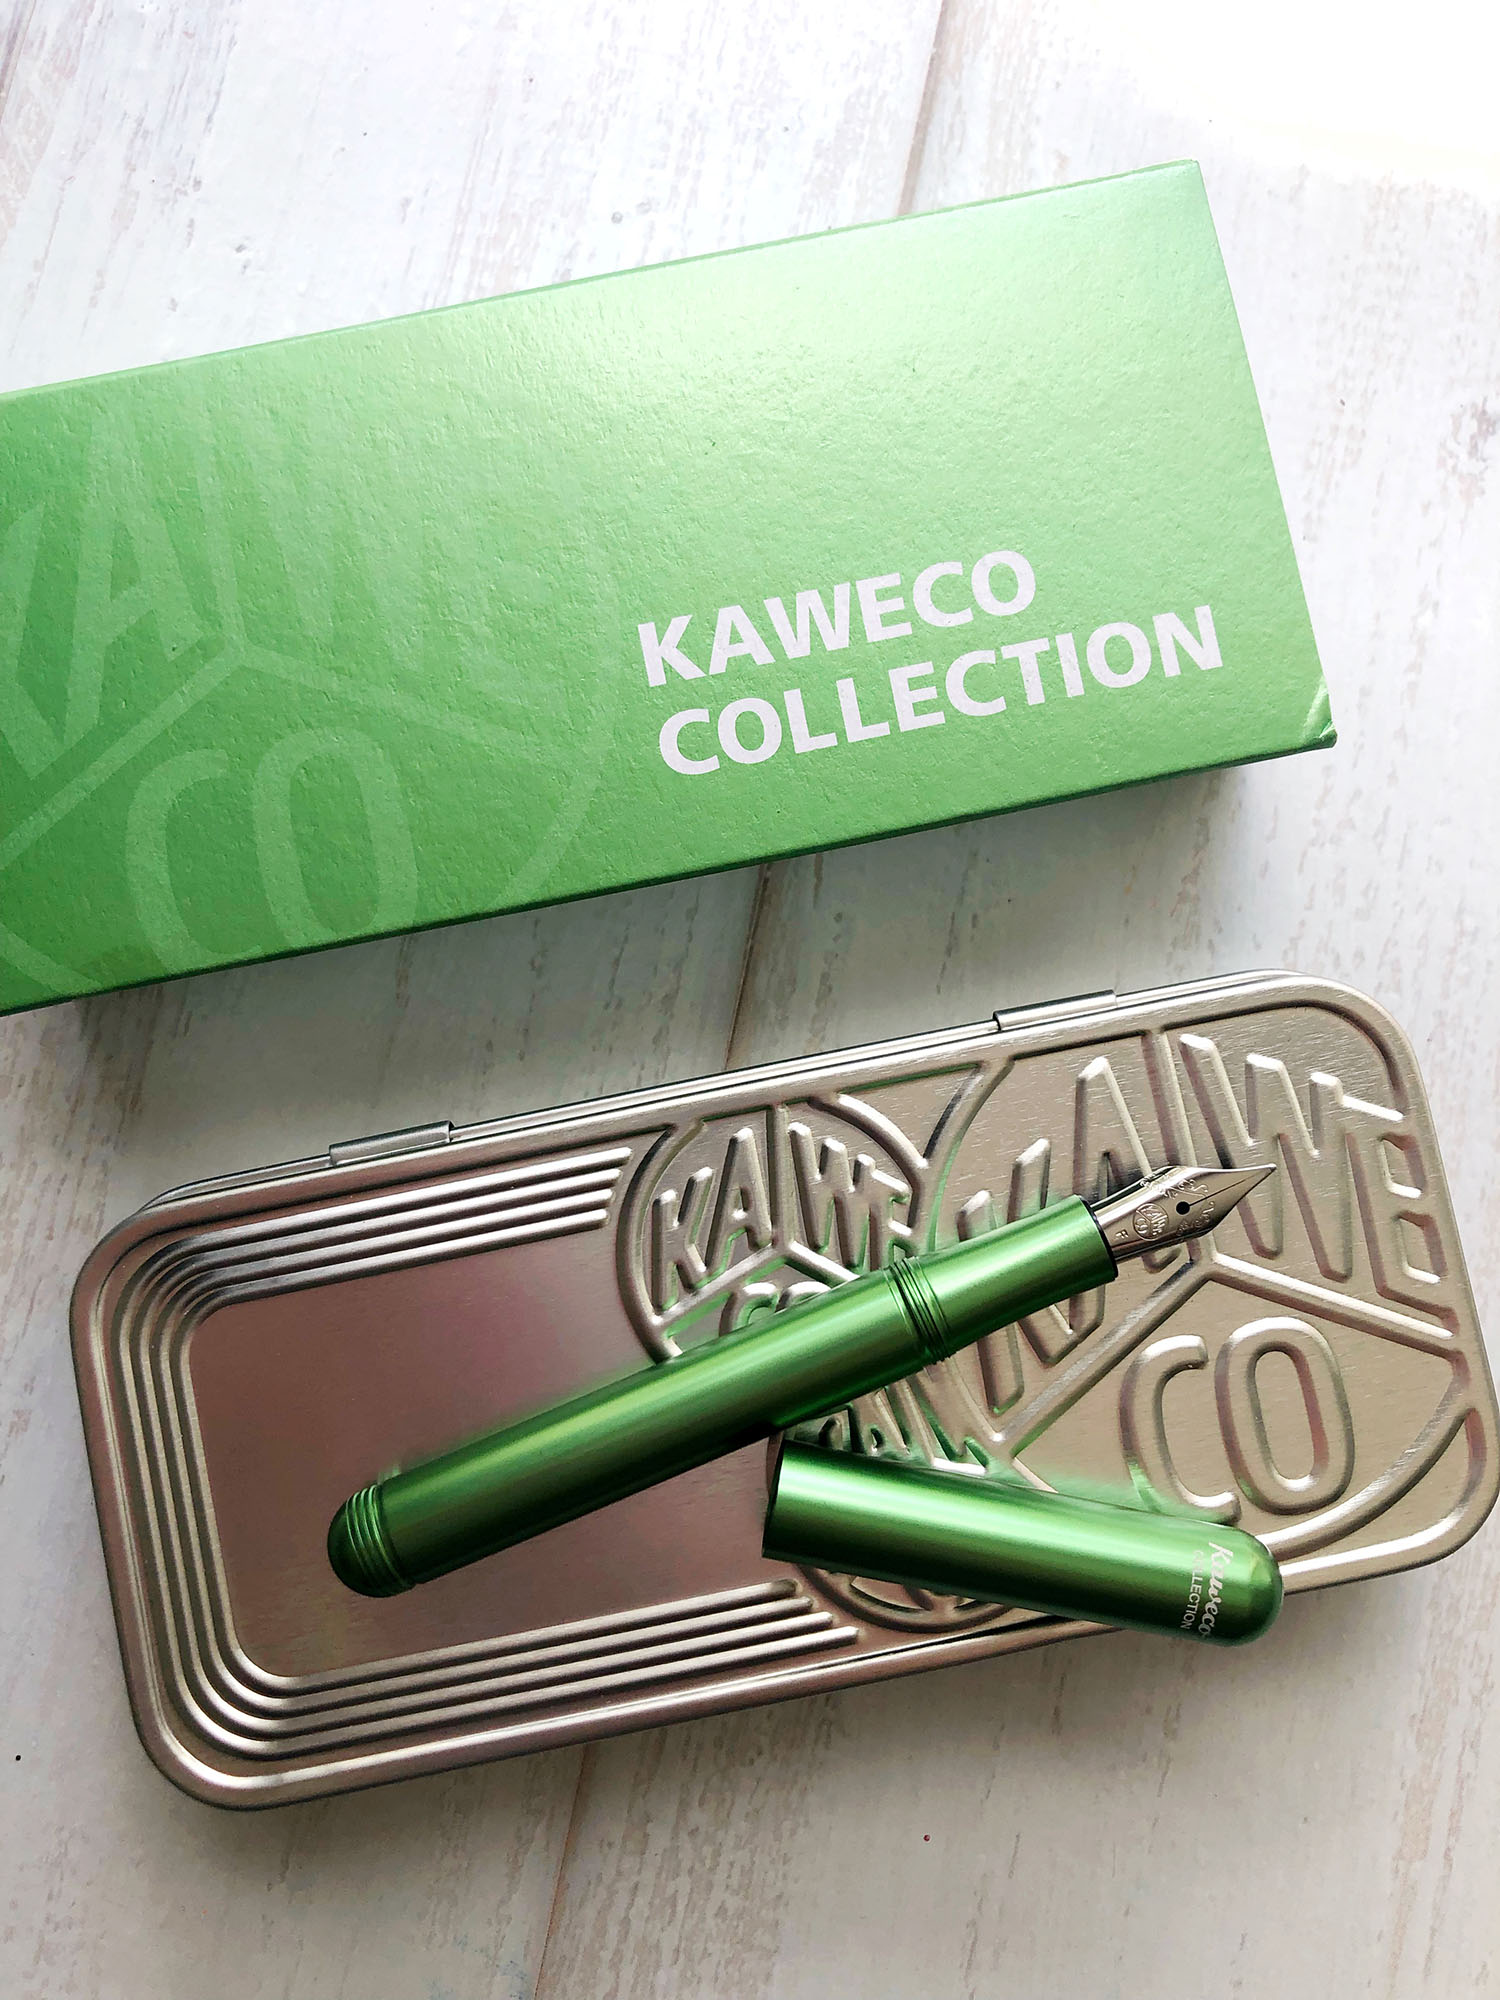 https://www.penchalet.com/blog/wp-content/uploads/2022/08/kaweco-liliput-collectors-edition-green-fountain-pen-with-packaging_photo-credit-mel-naujoks.jpg